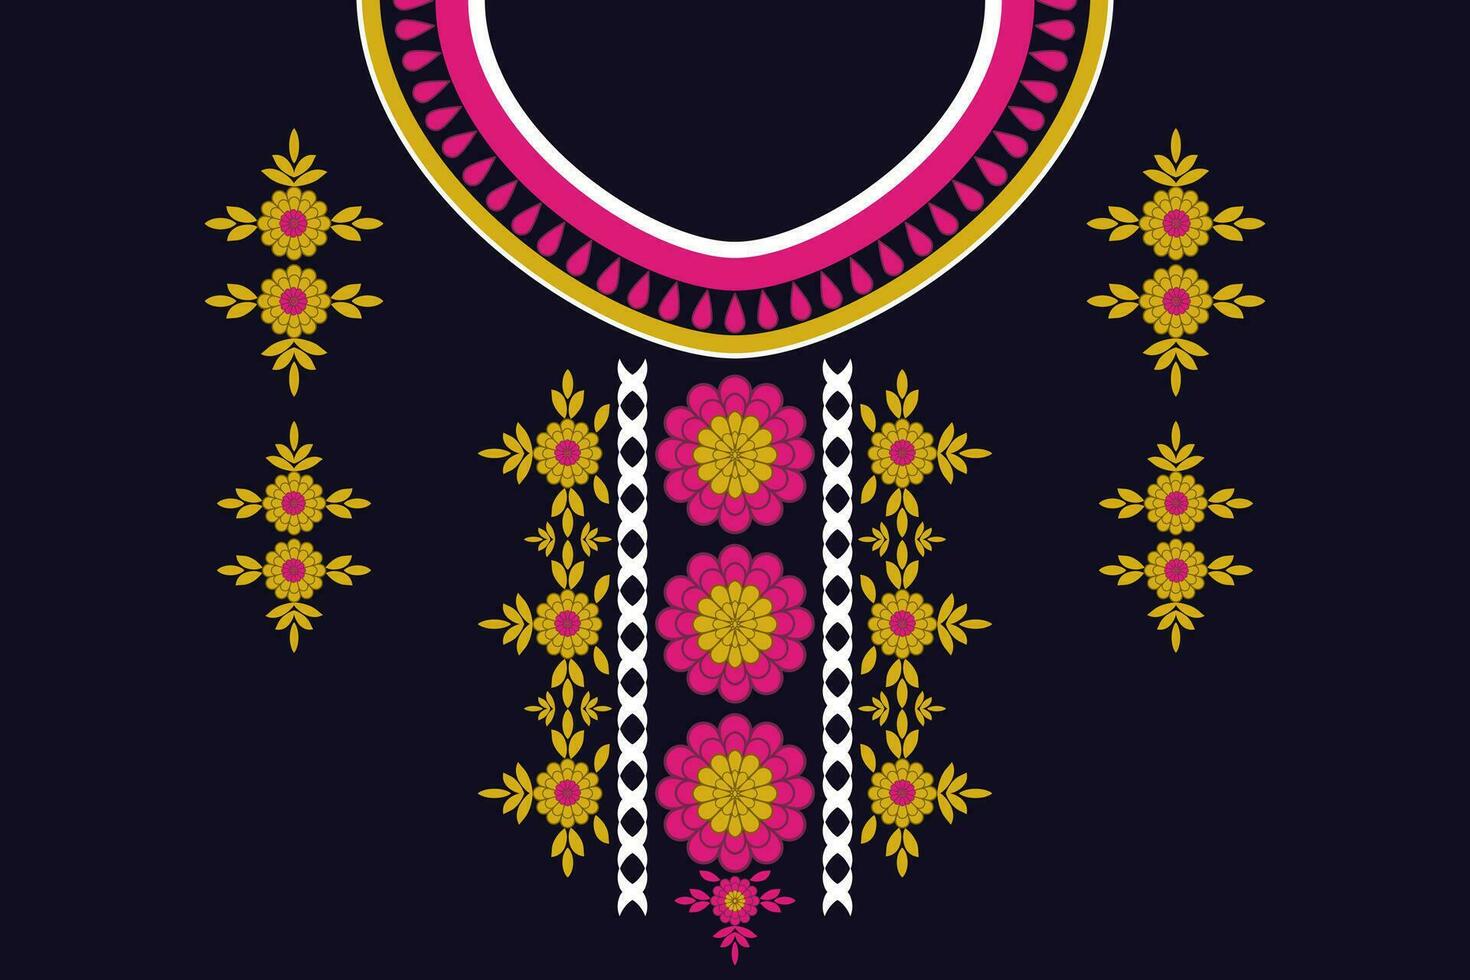 ethnic collar lace pattern traditional on black background. Necklace embroidery abstract vector illustration. Designs for fashion, fashion men, fashion women, kaftan, collar pattern, necklace pattern